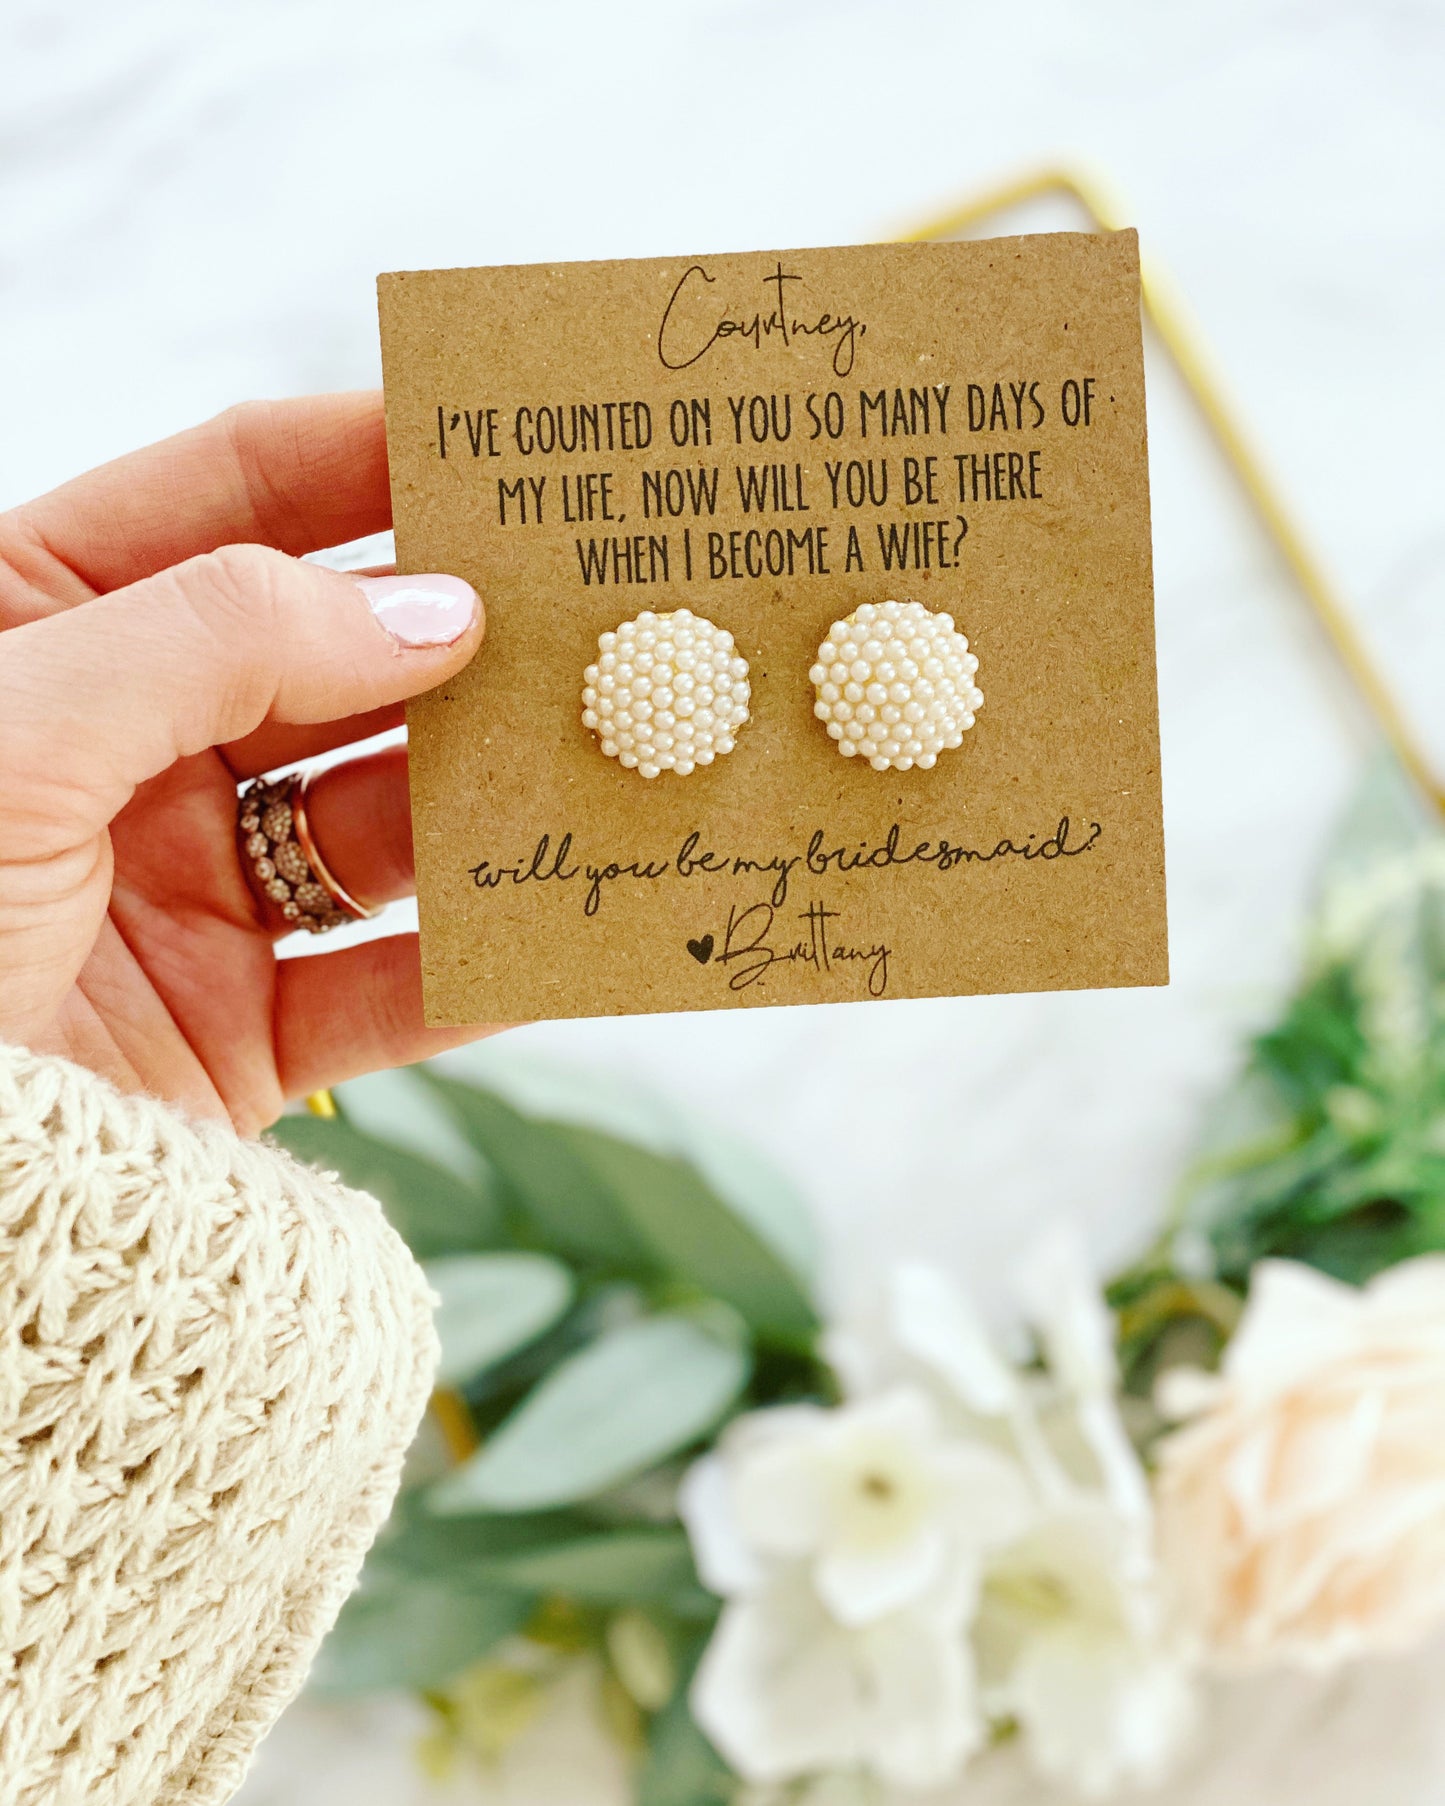 Bridesmaid Earrings for Her